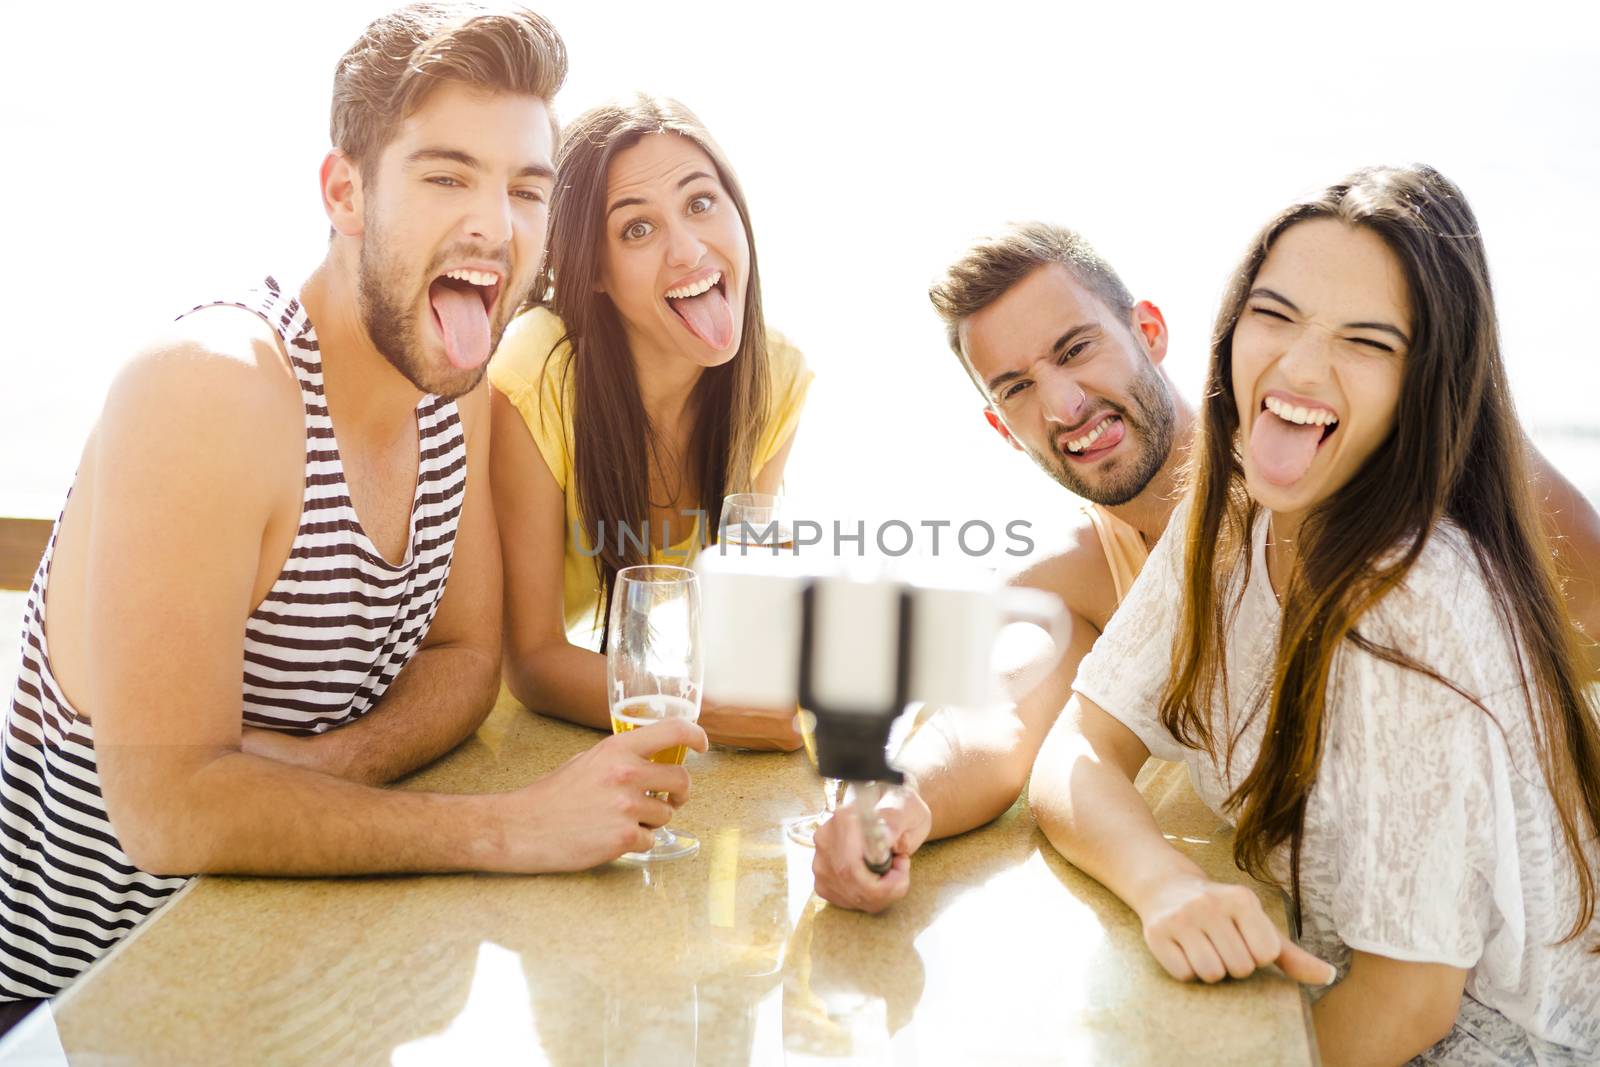 Group of friends at the beach bar and making a selfie